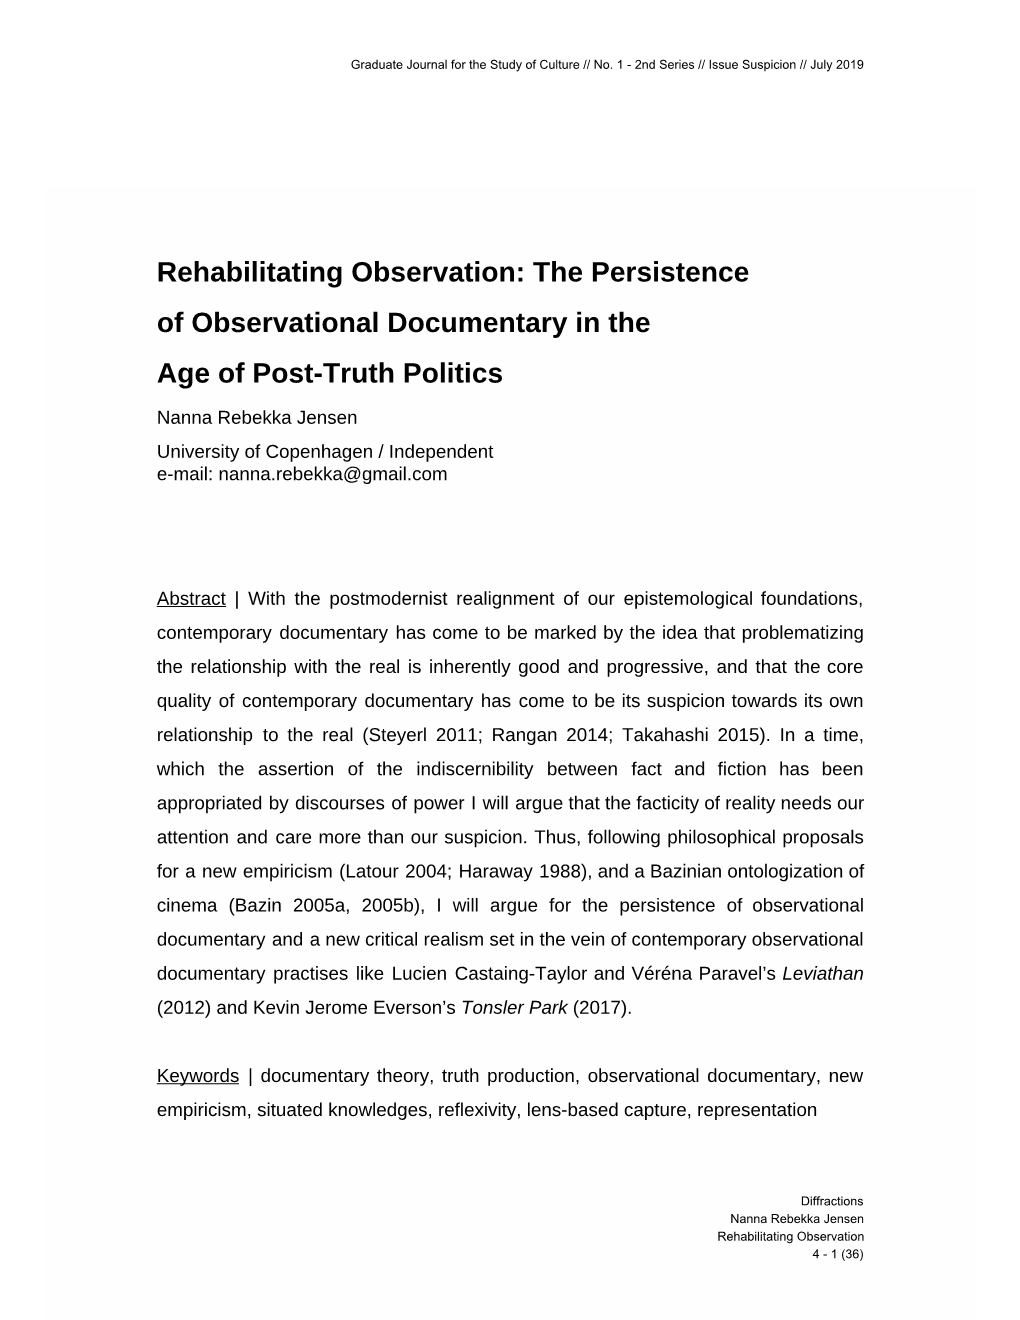 The Persistence of Observational Documentary in the Age of Post